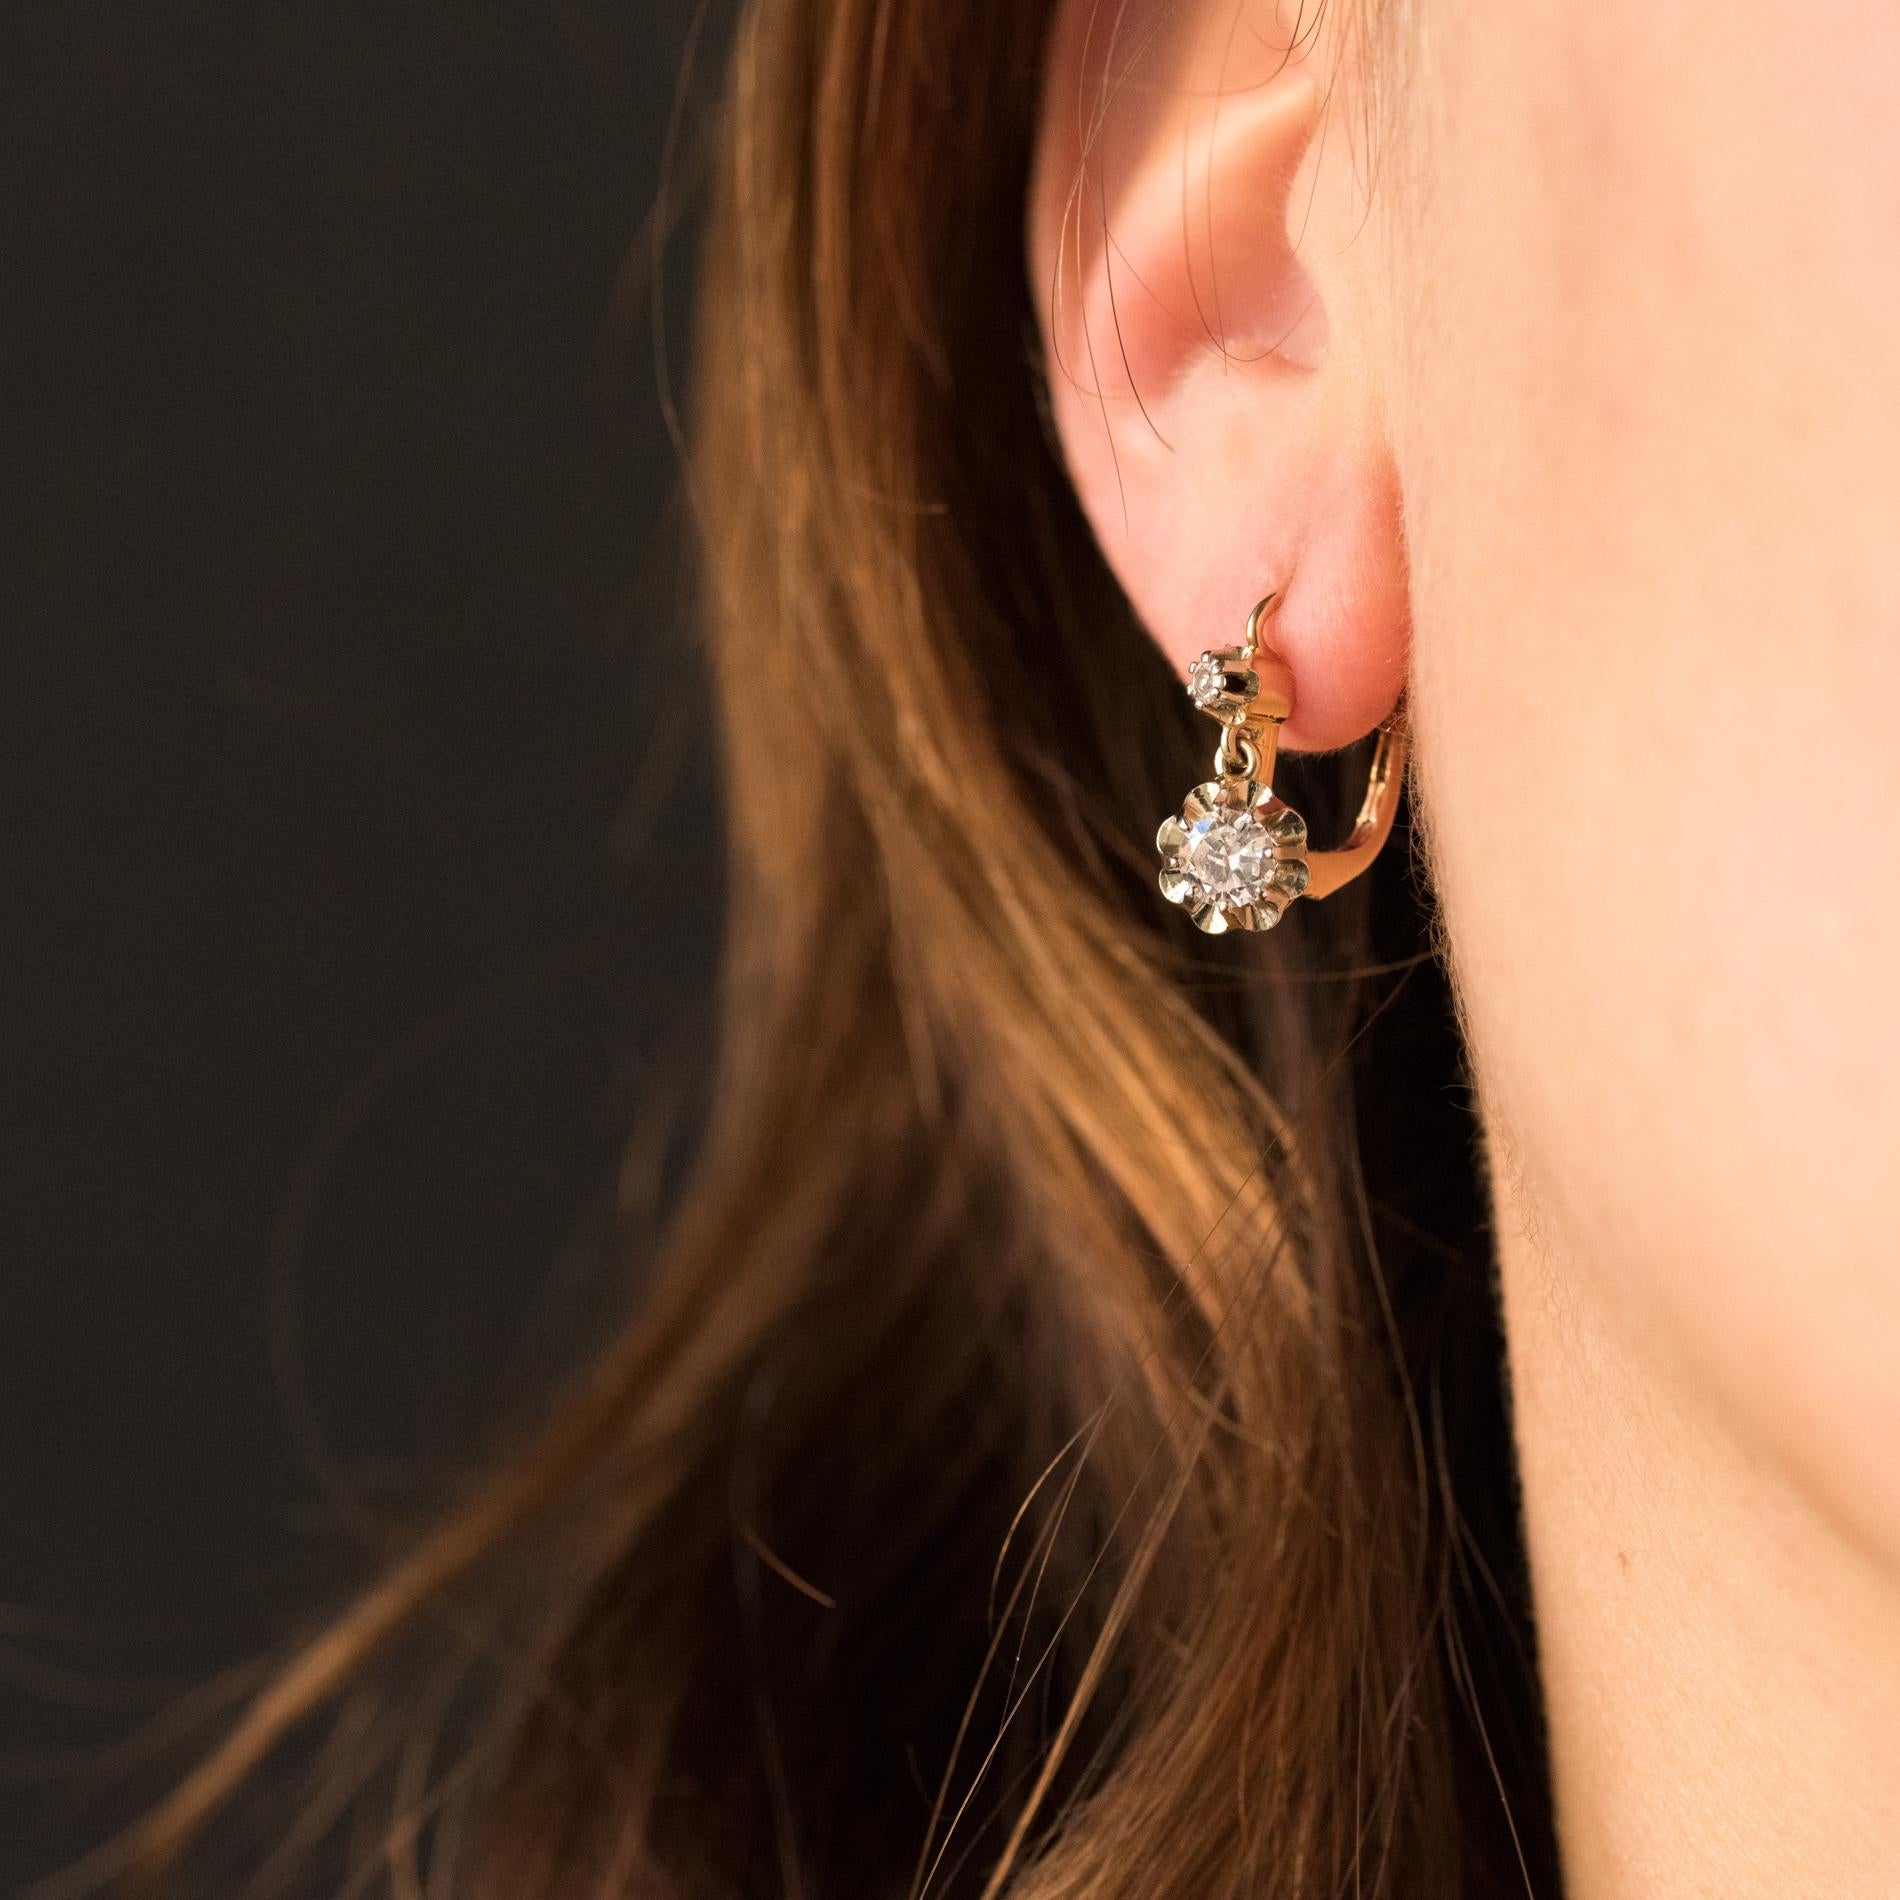 Earrings in 18 karats rose and white gold, eagle's head hallmark.
Antique drop earring, each is set with claws of a brilliant-cut diamond on a sun set surmounted by a smaller diamond. The closure system is from the front.
Total weight of diamonds: